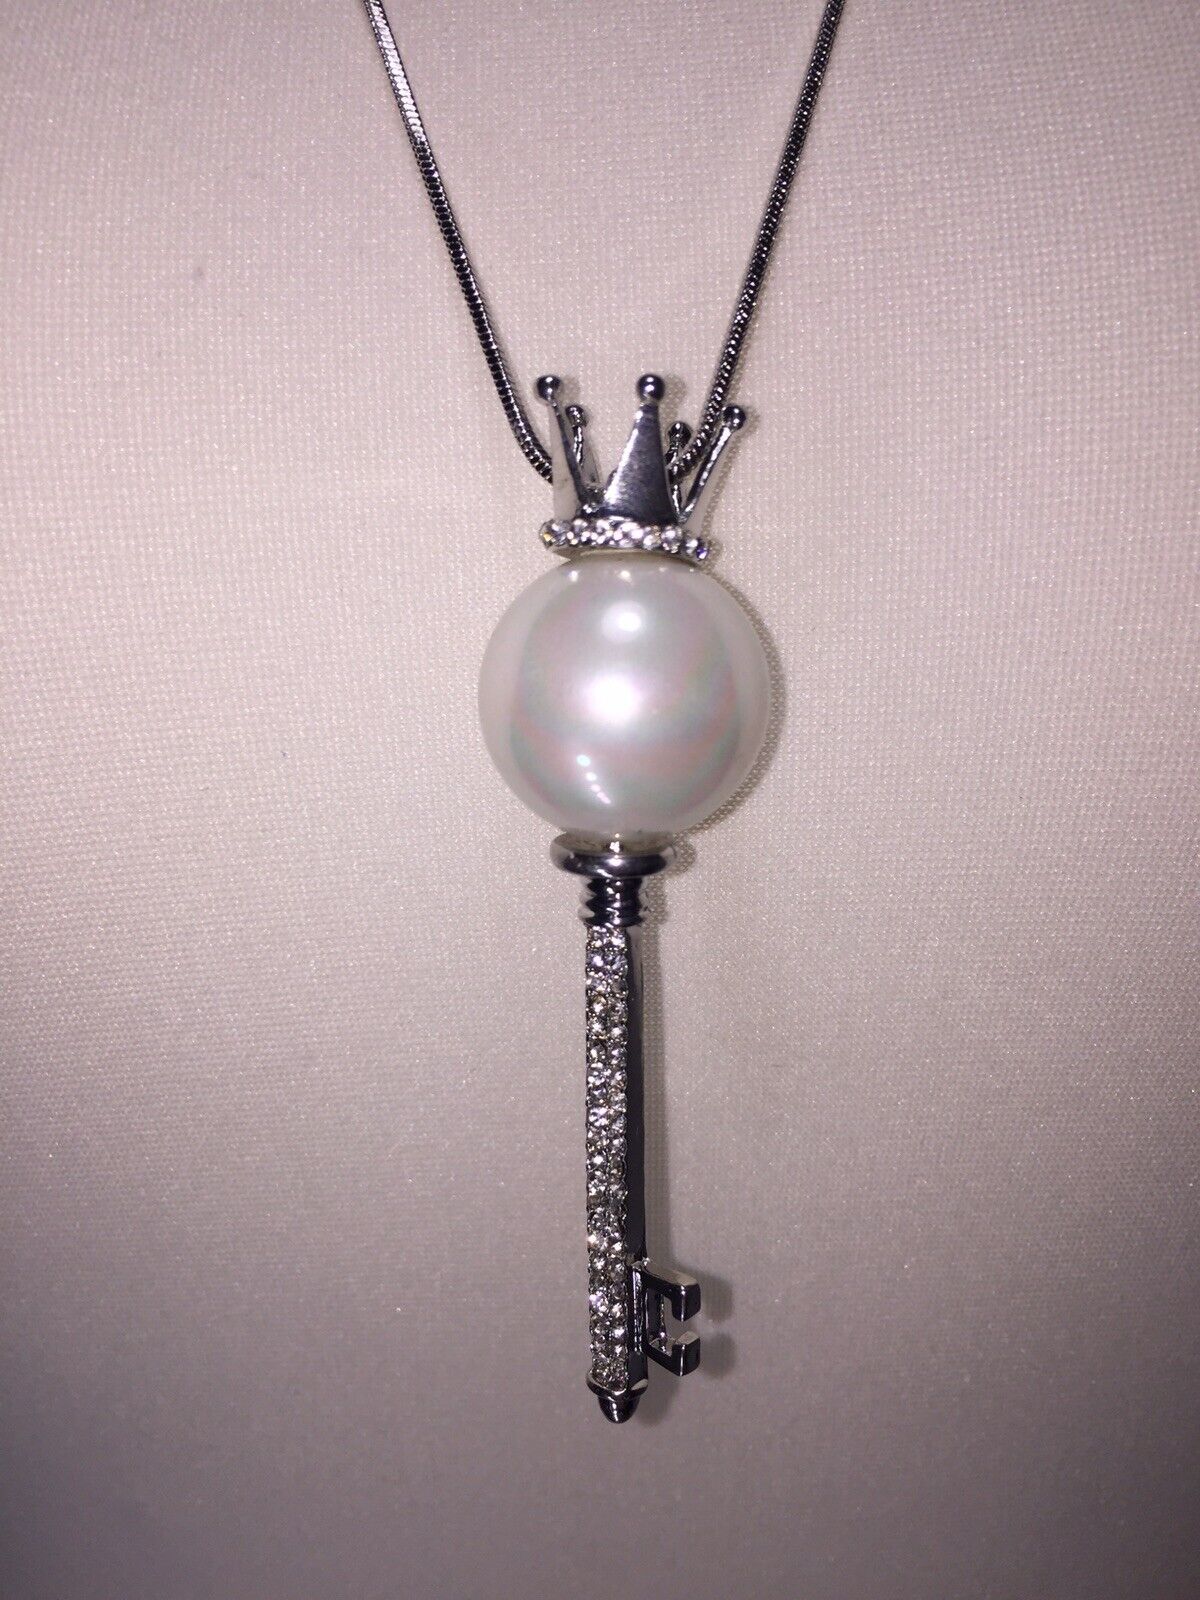 Crystal Pearl Key Necklace - Silver